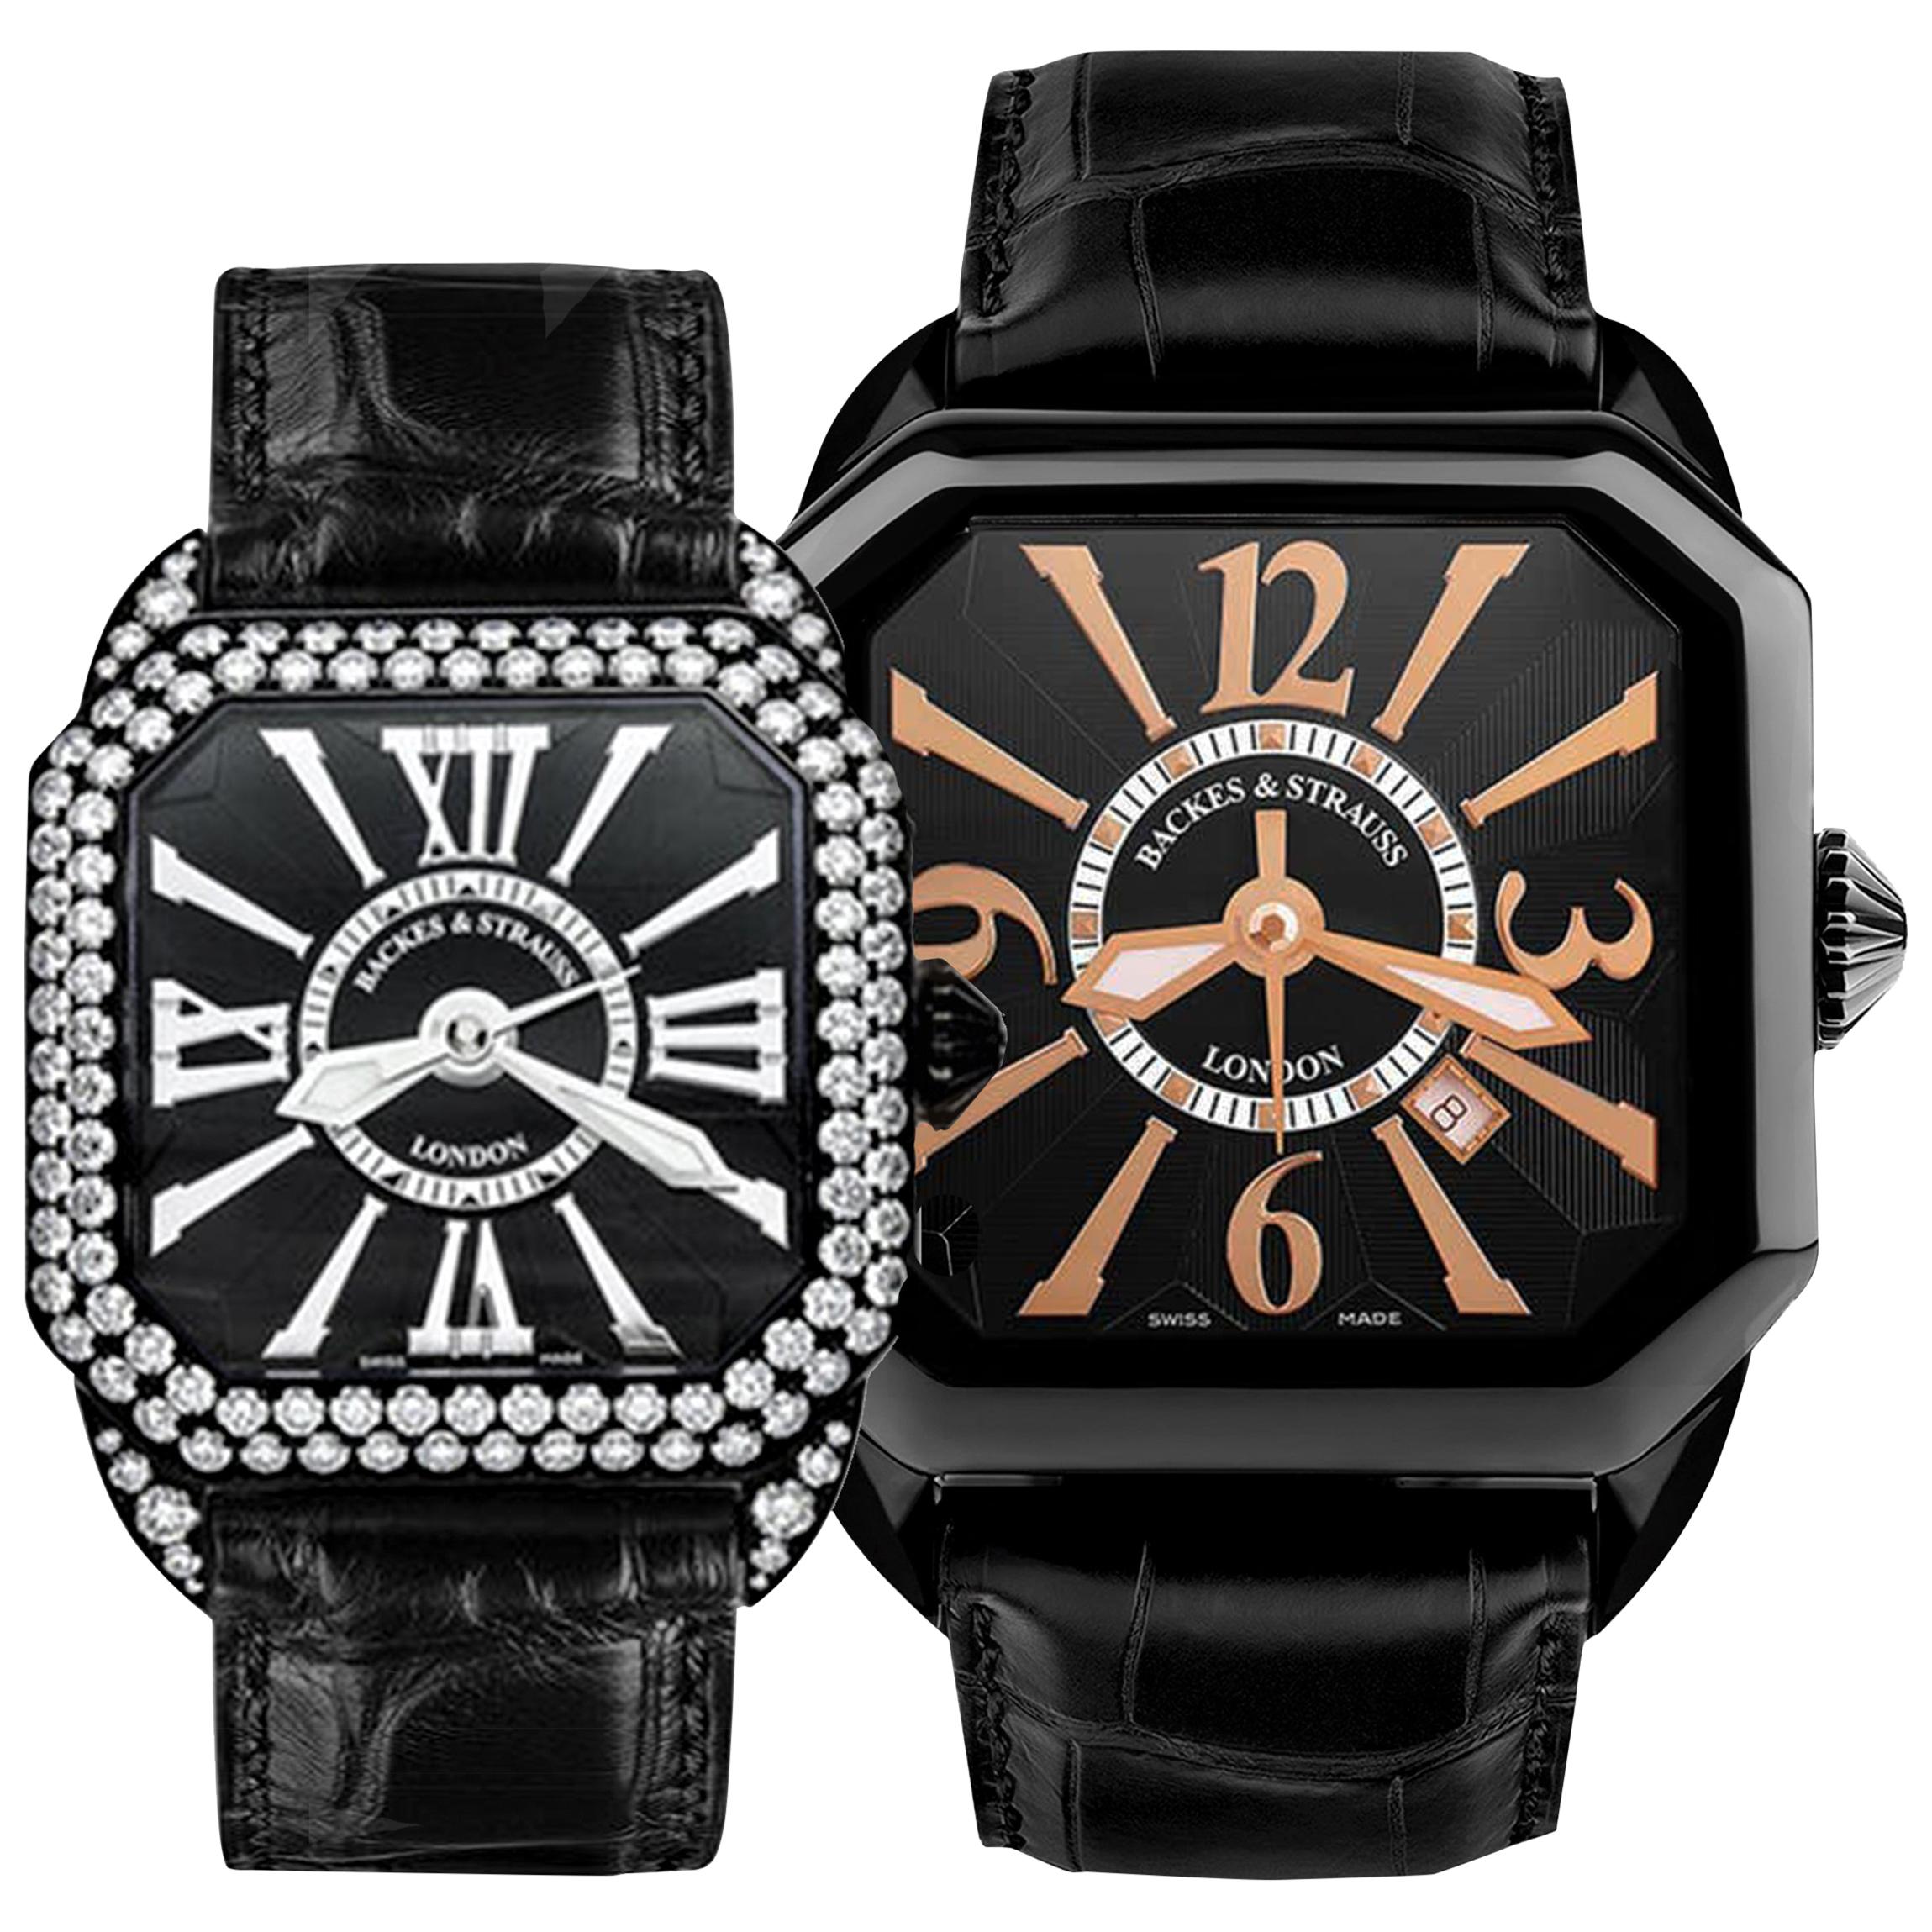 Luxury Diamond Watch Duo for Men and Women - Limited Holiday Offer -20% Discount For Sale